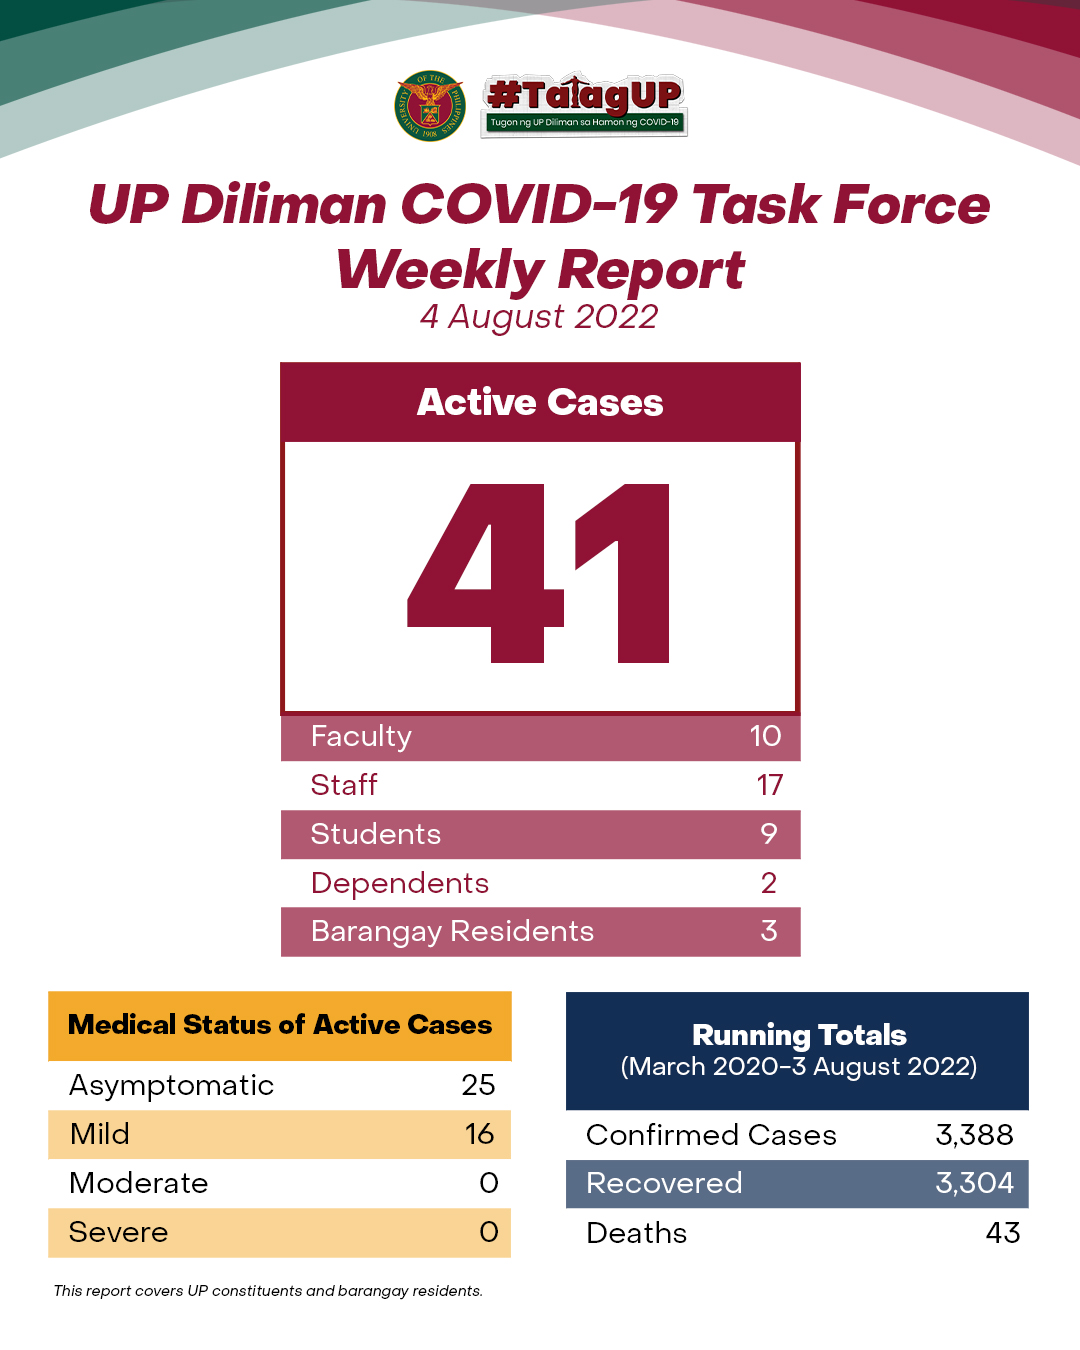 UP Diliman COVID-19 Task Force Weekly Report (4 August 2022)